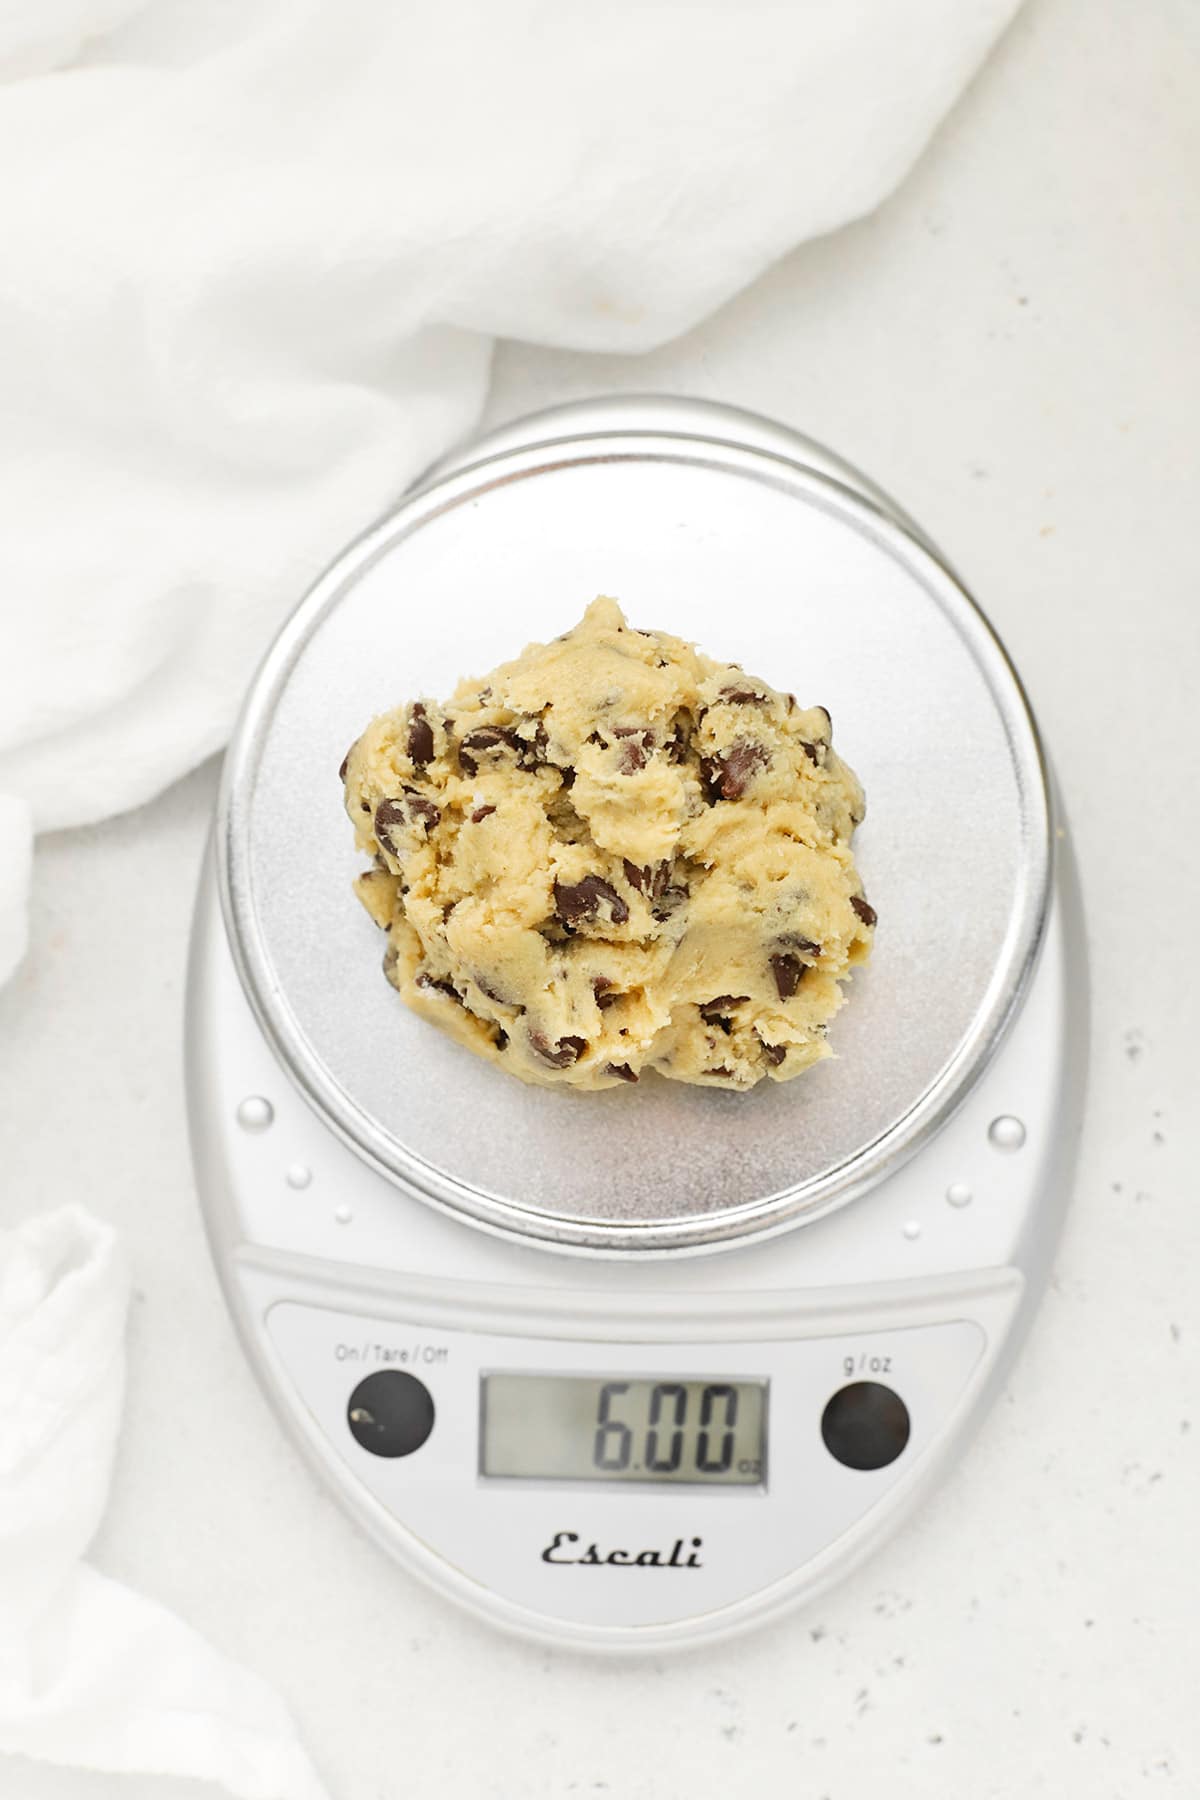 Weighing 6 oz. of dough to make thick Levain gluten-free chocolate chip cookies